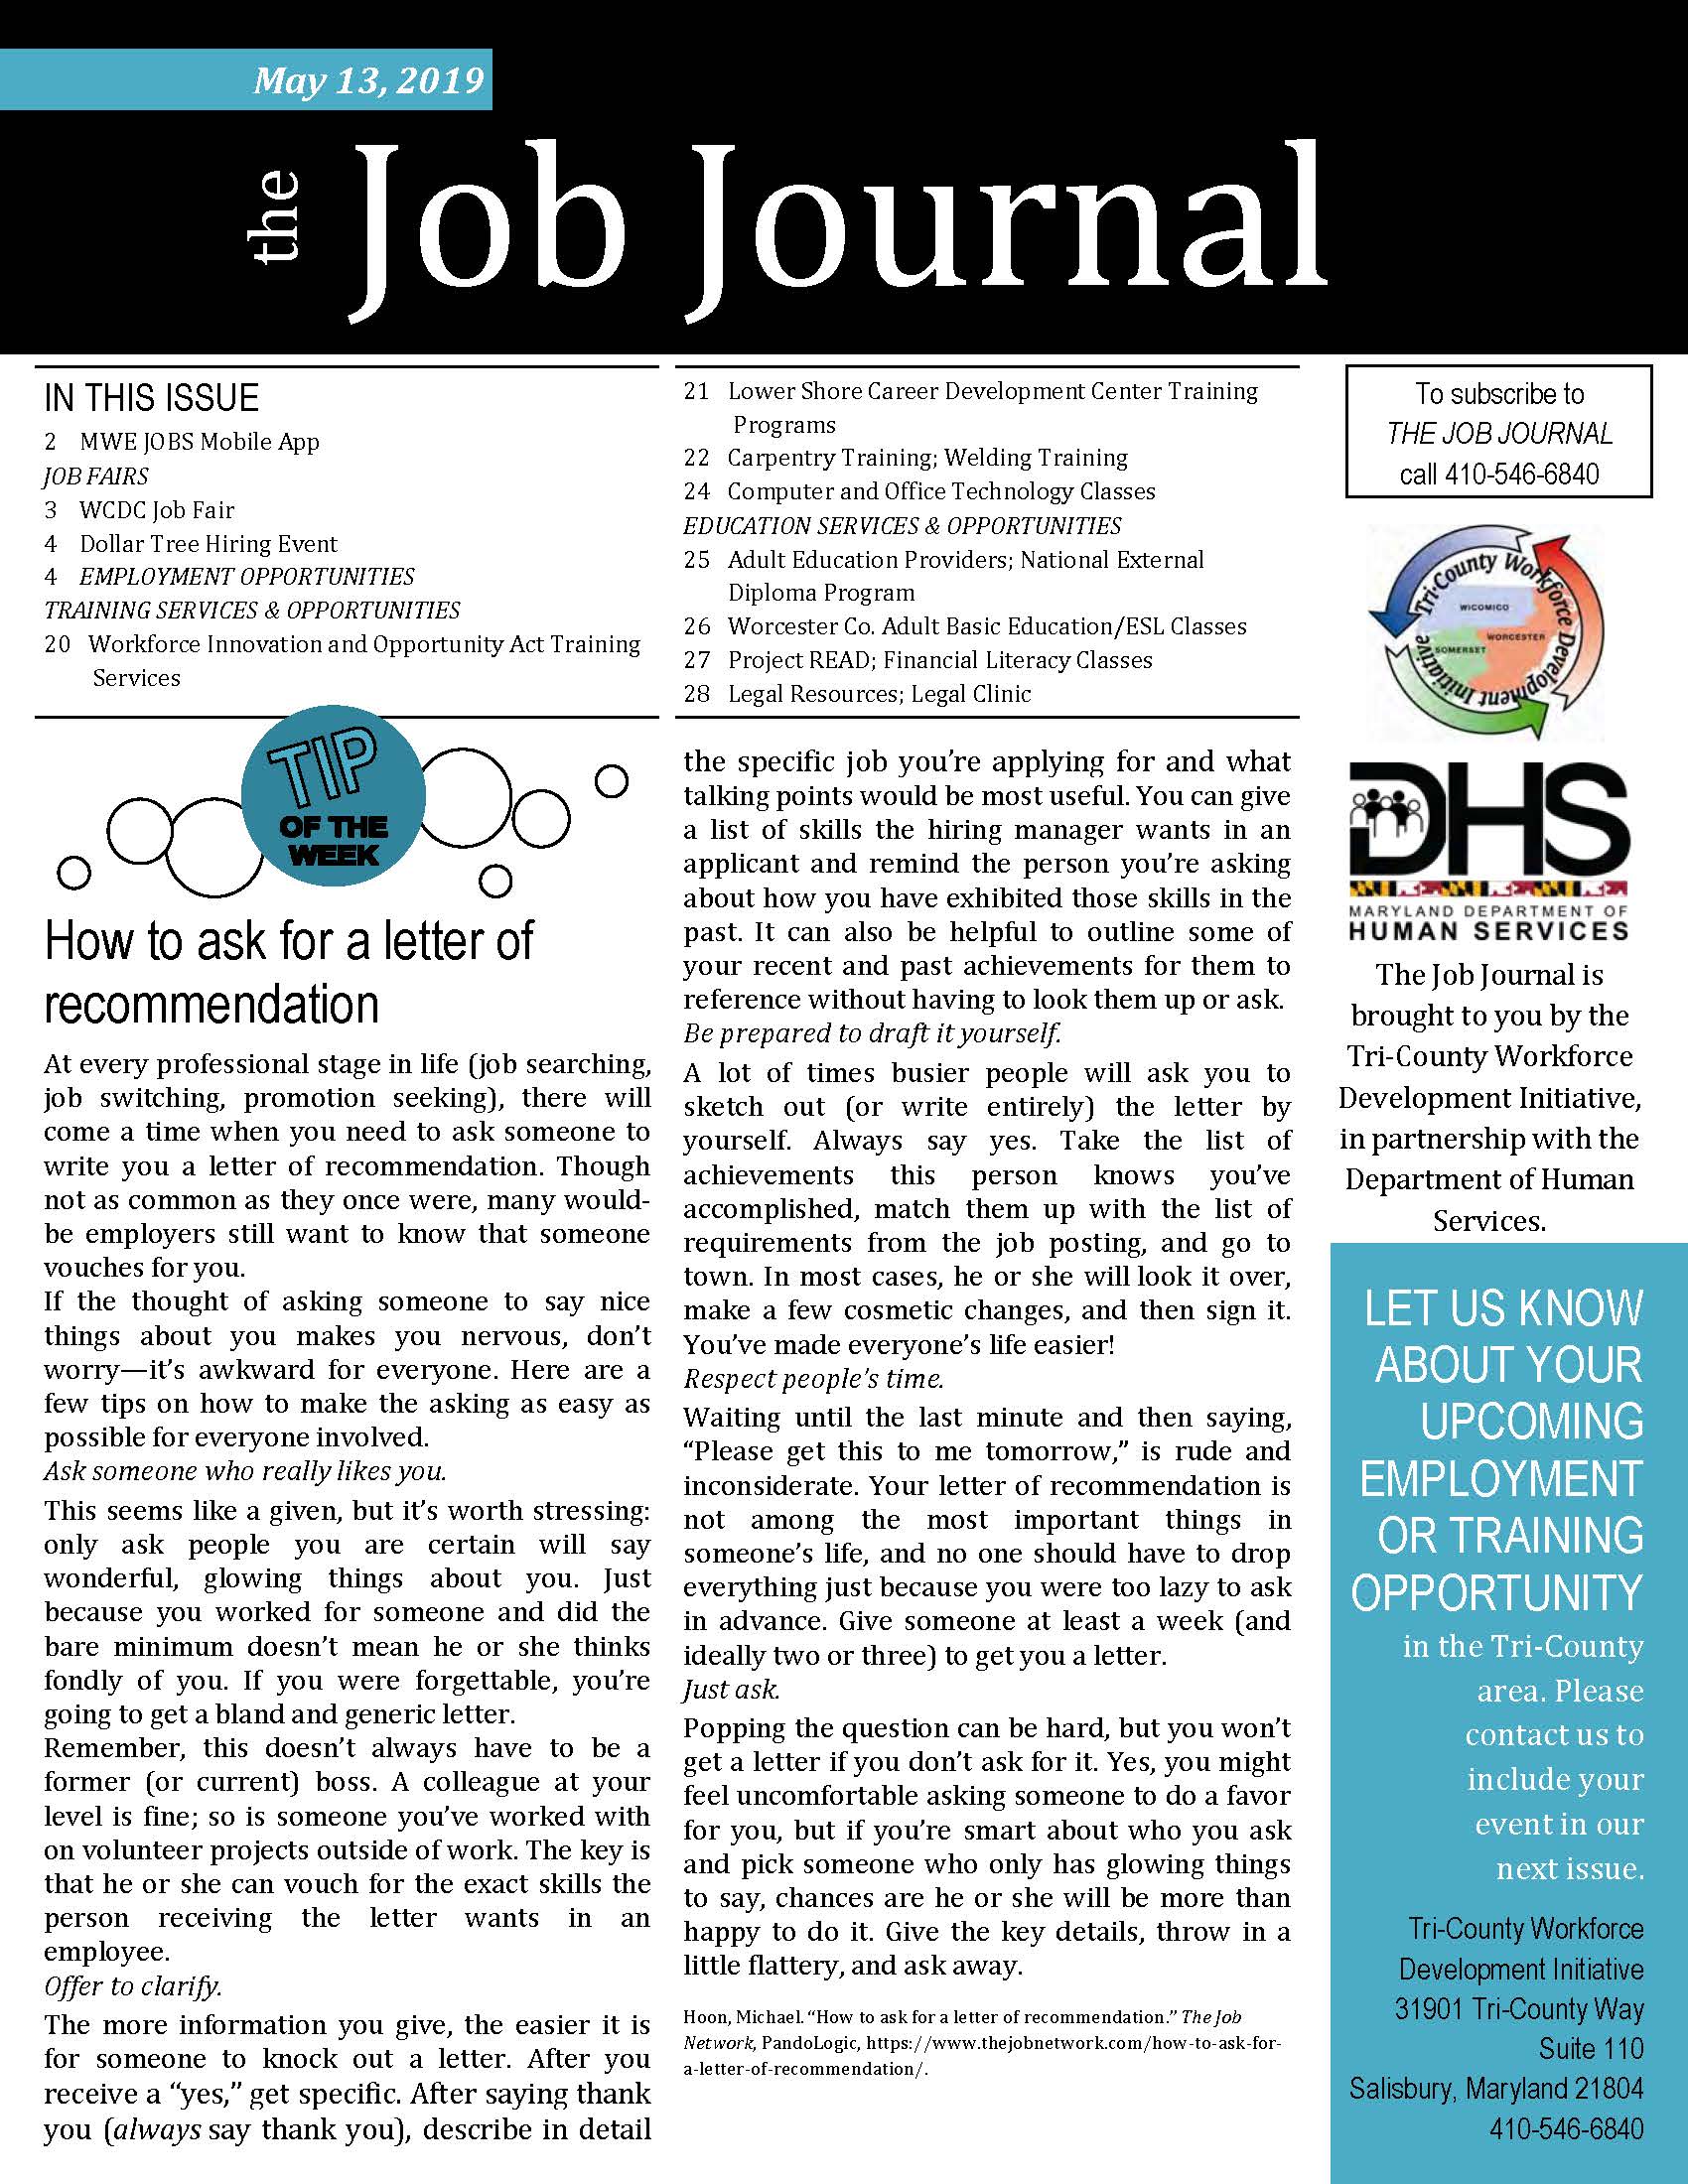 Front Cover of The Job Journal 05.13.2019